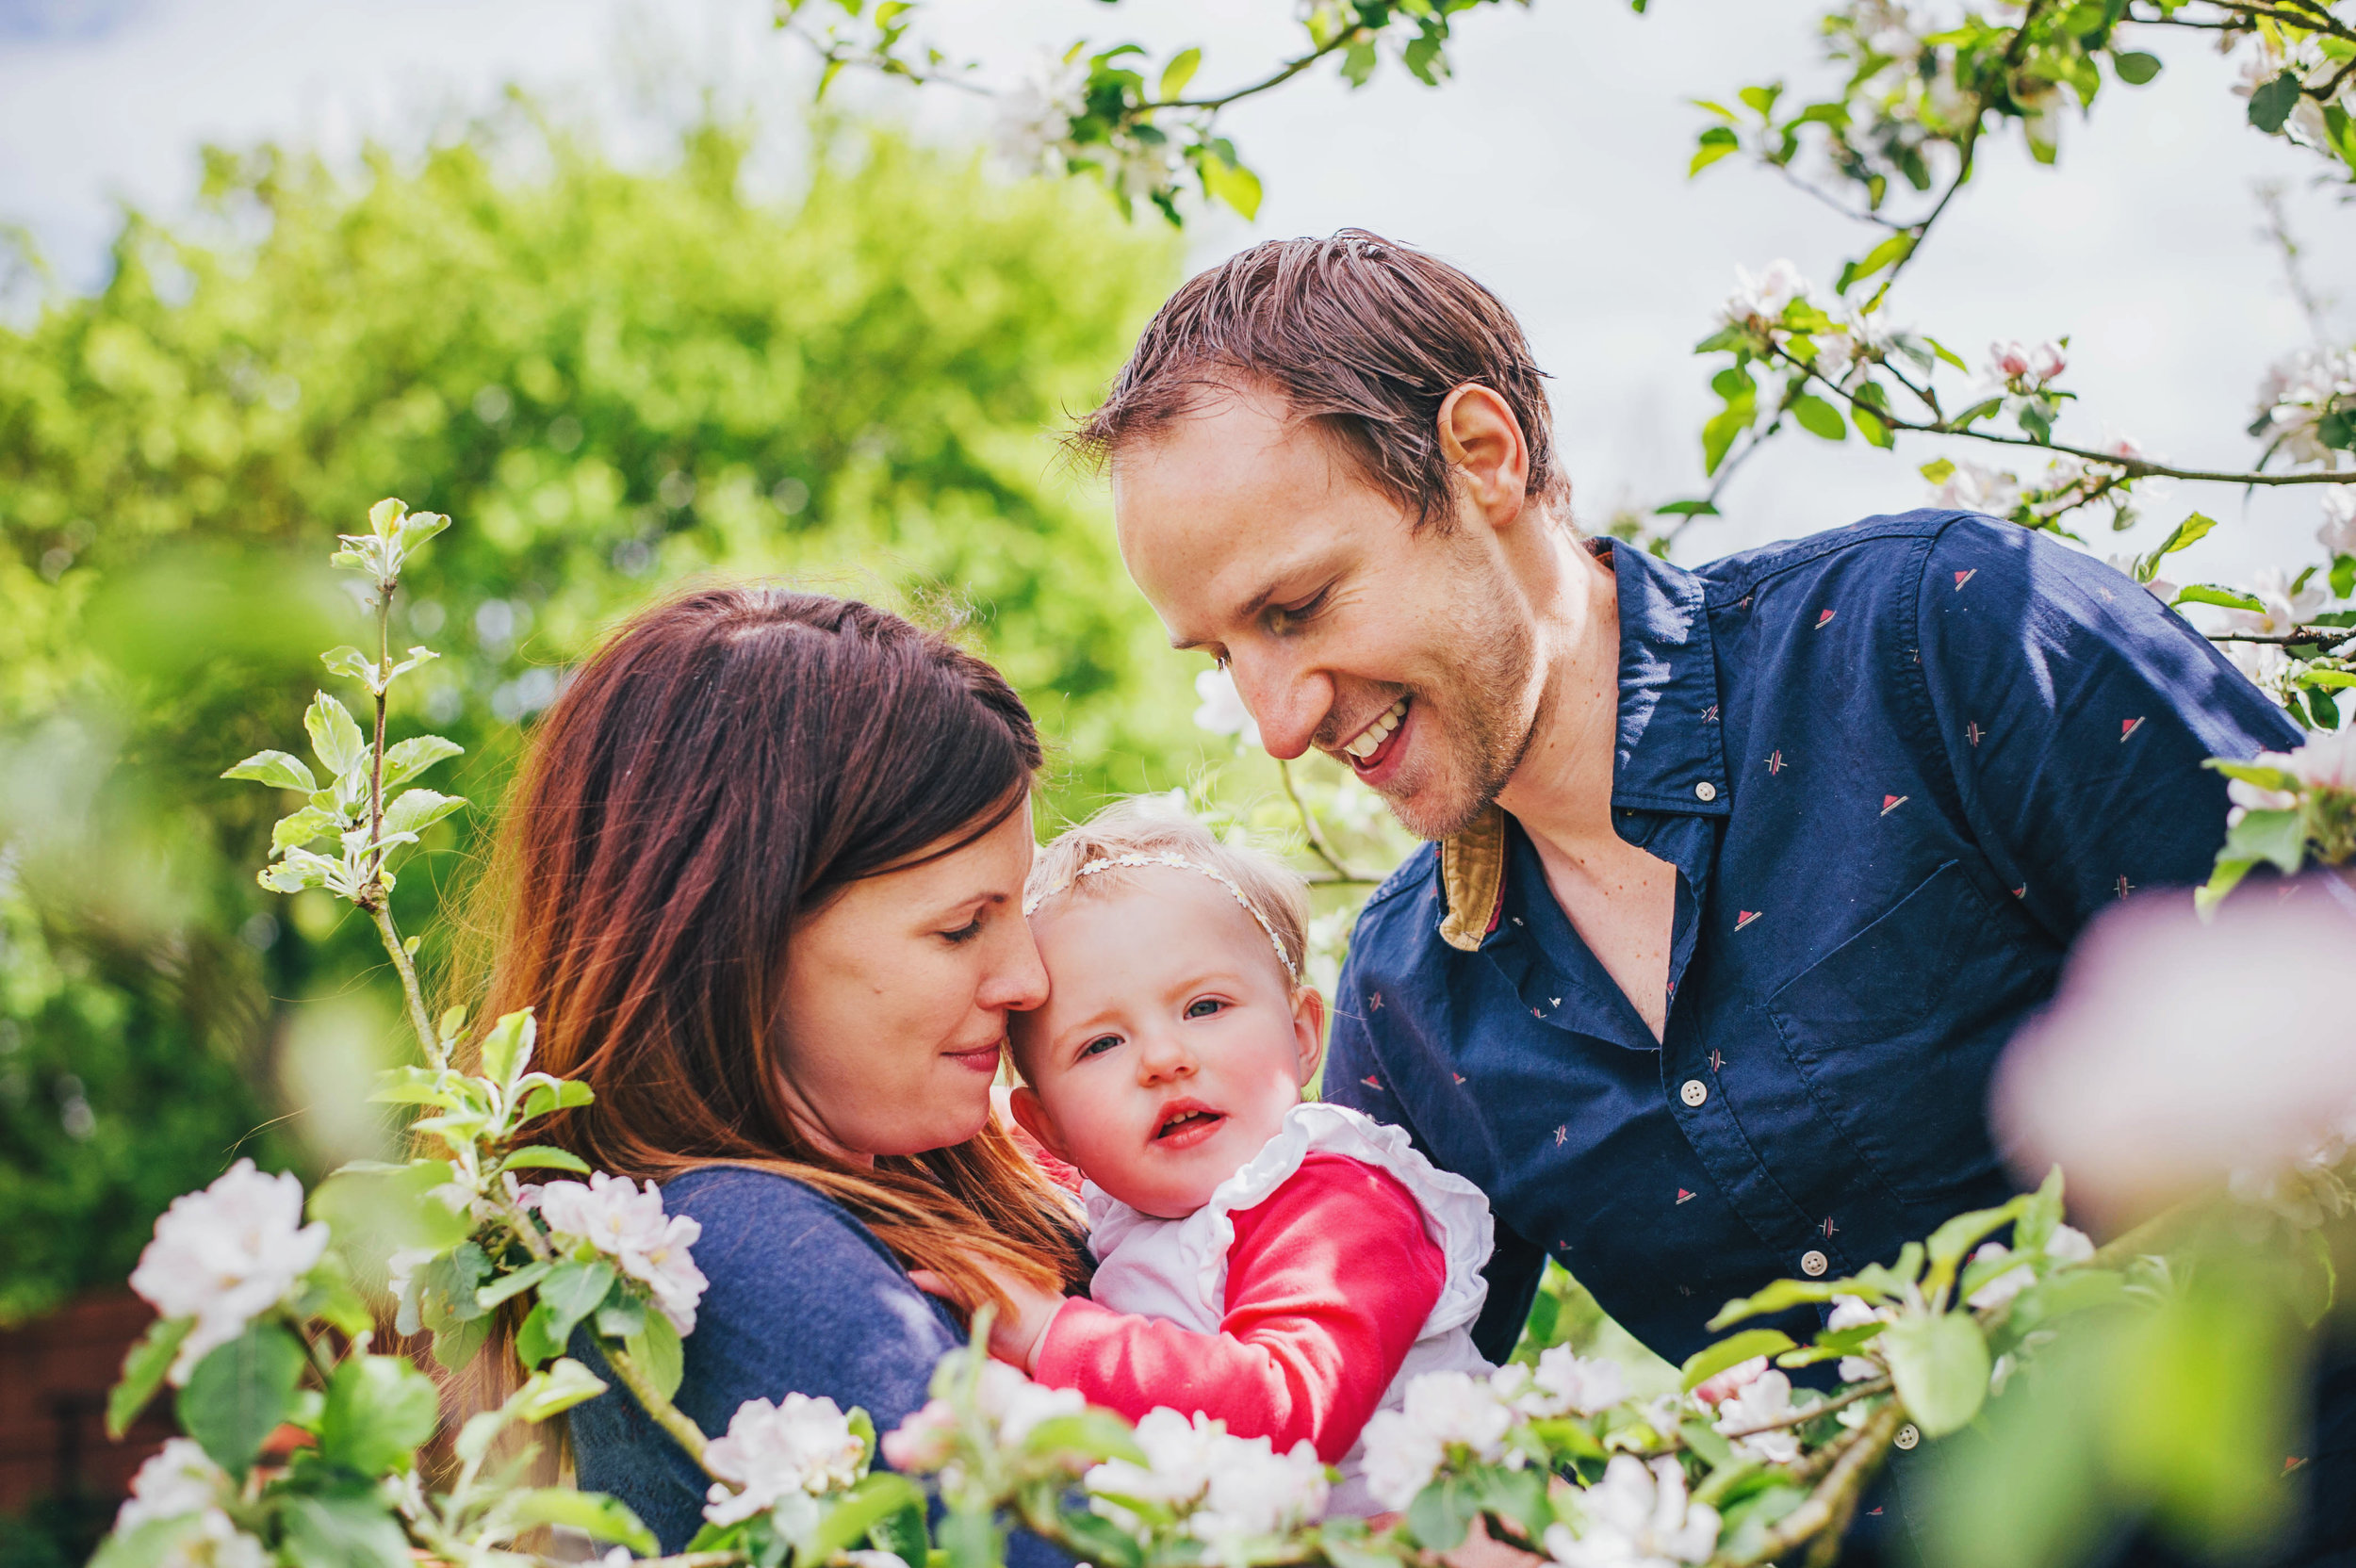 Mum and Dad with baby girl in Blossom At Home Lifestyle Shoot Essex UK Documentary Portrait Photographer